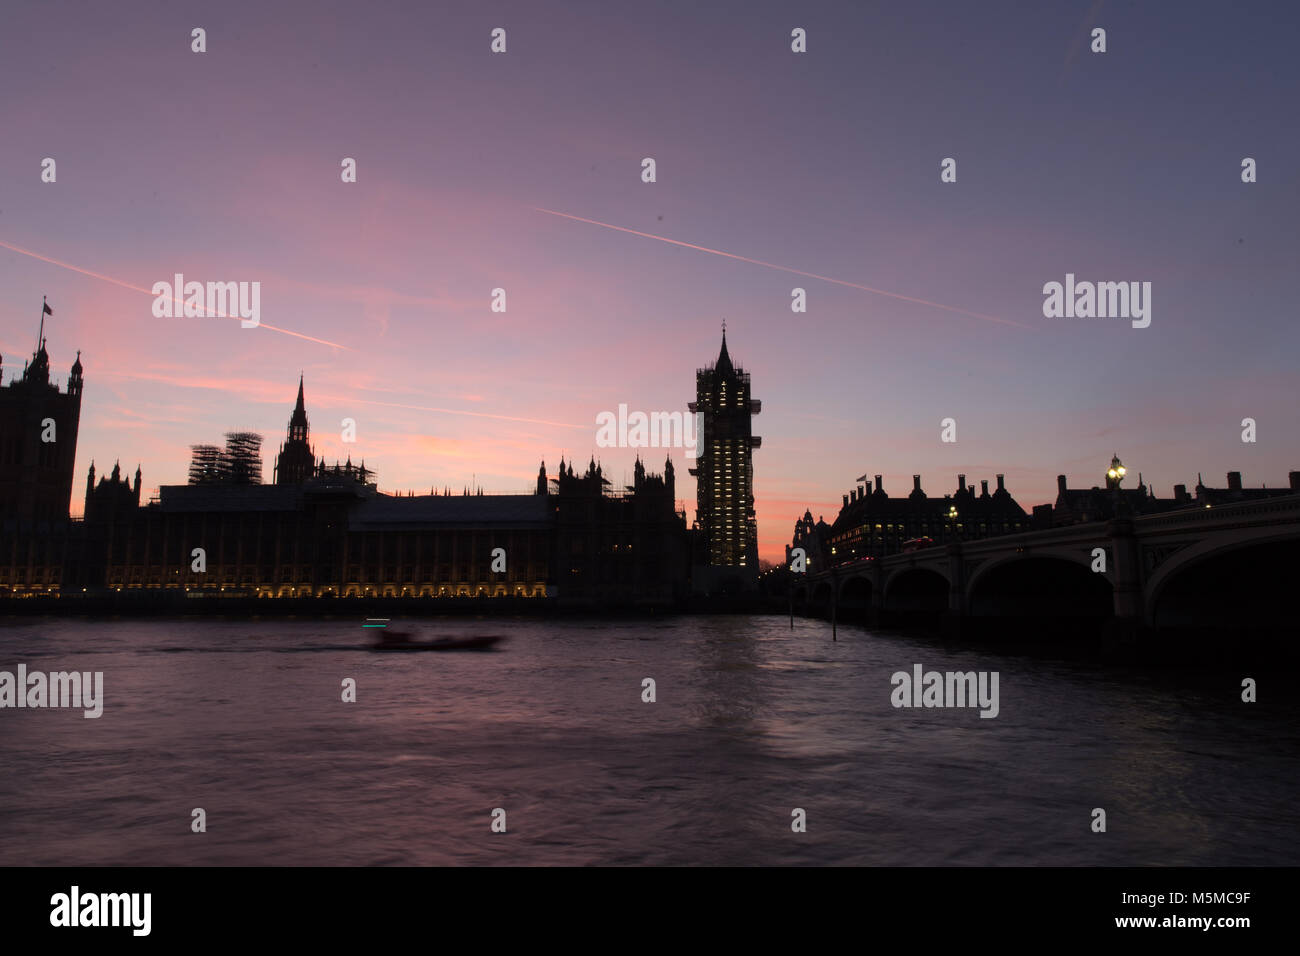 London, UK. 24th February, 2018. Houses of Parliamant and Big Ben, London, UK. 24th February 2018. Pink skies following a beautiful sunset.  Credit: Carol Moir/Alamy Live News. Stock Photo